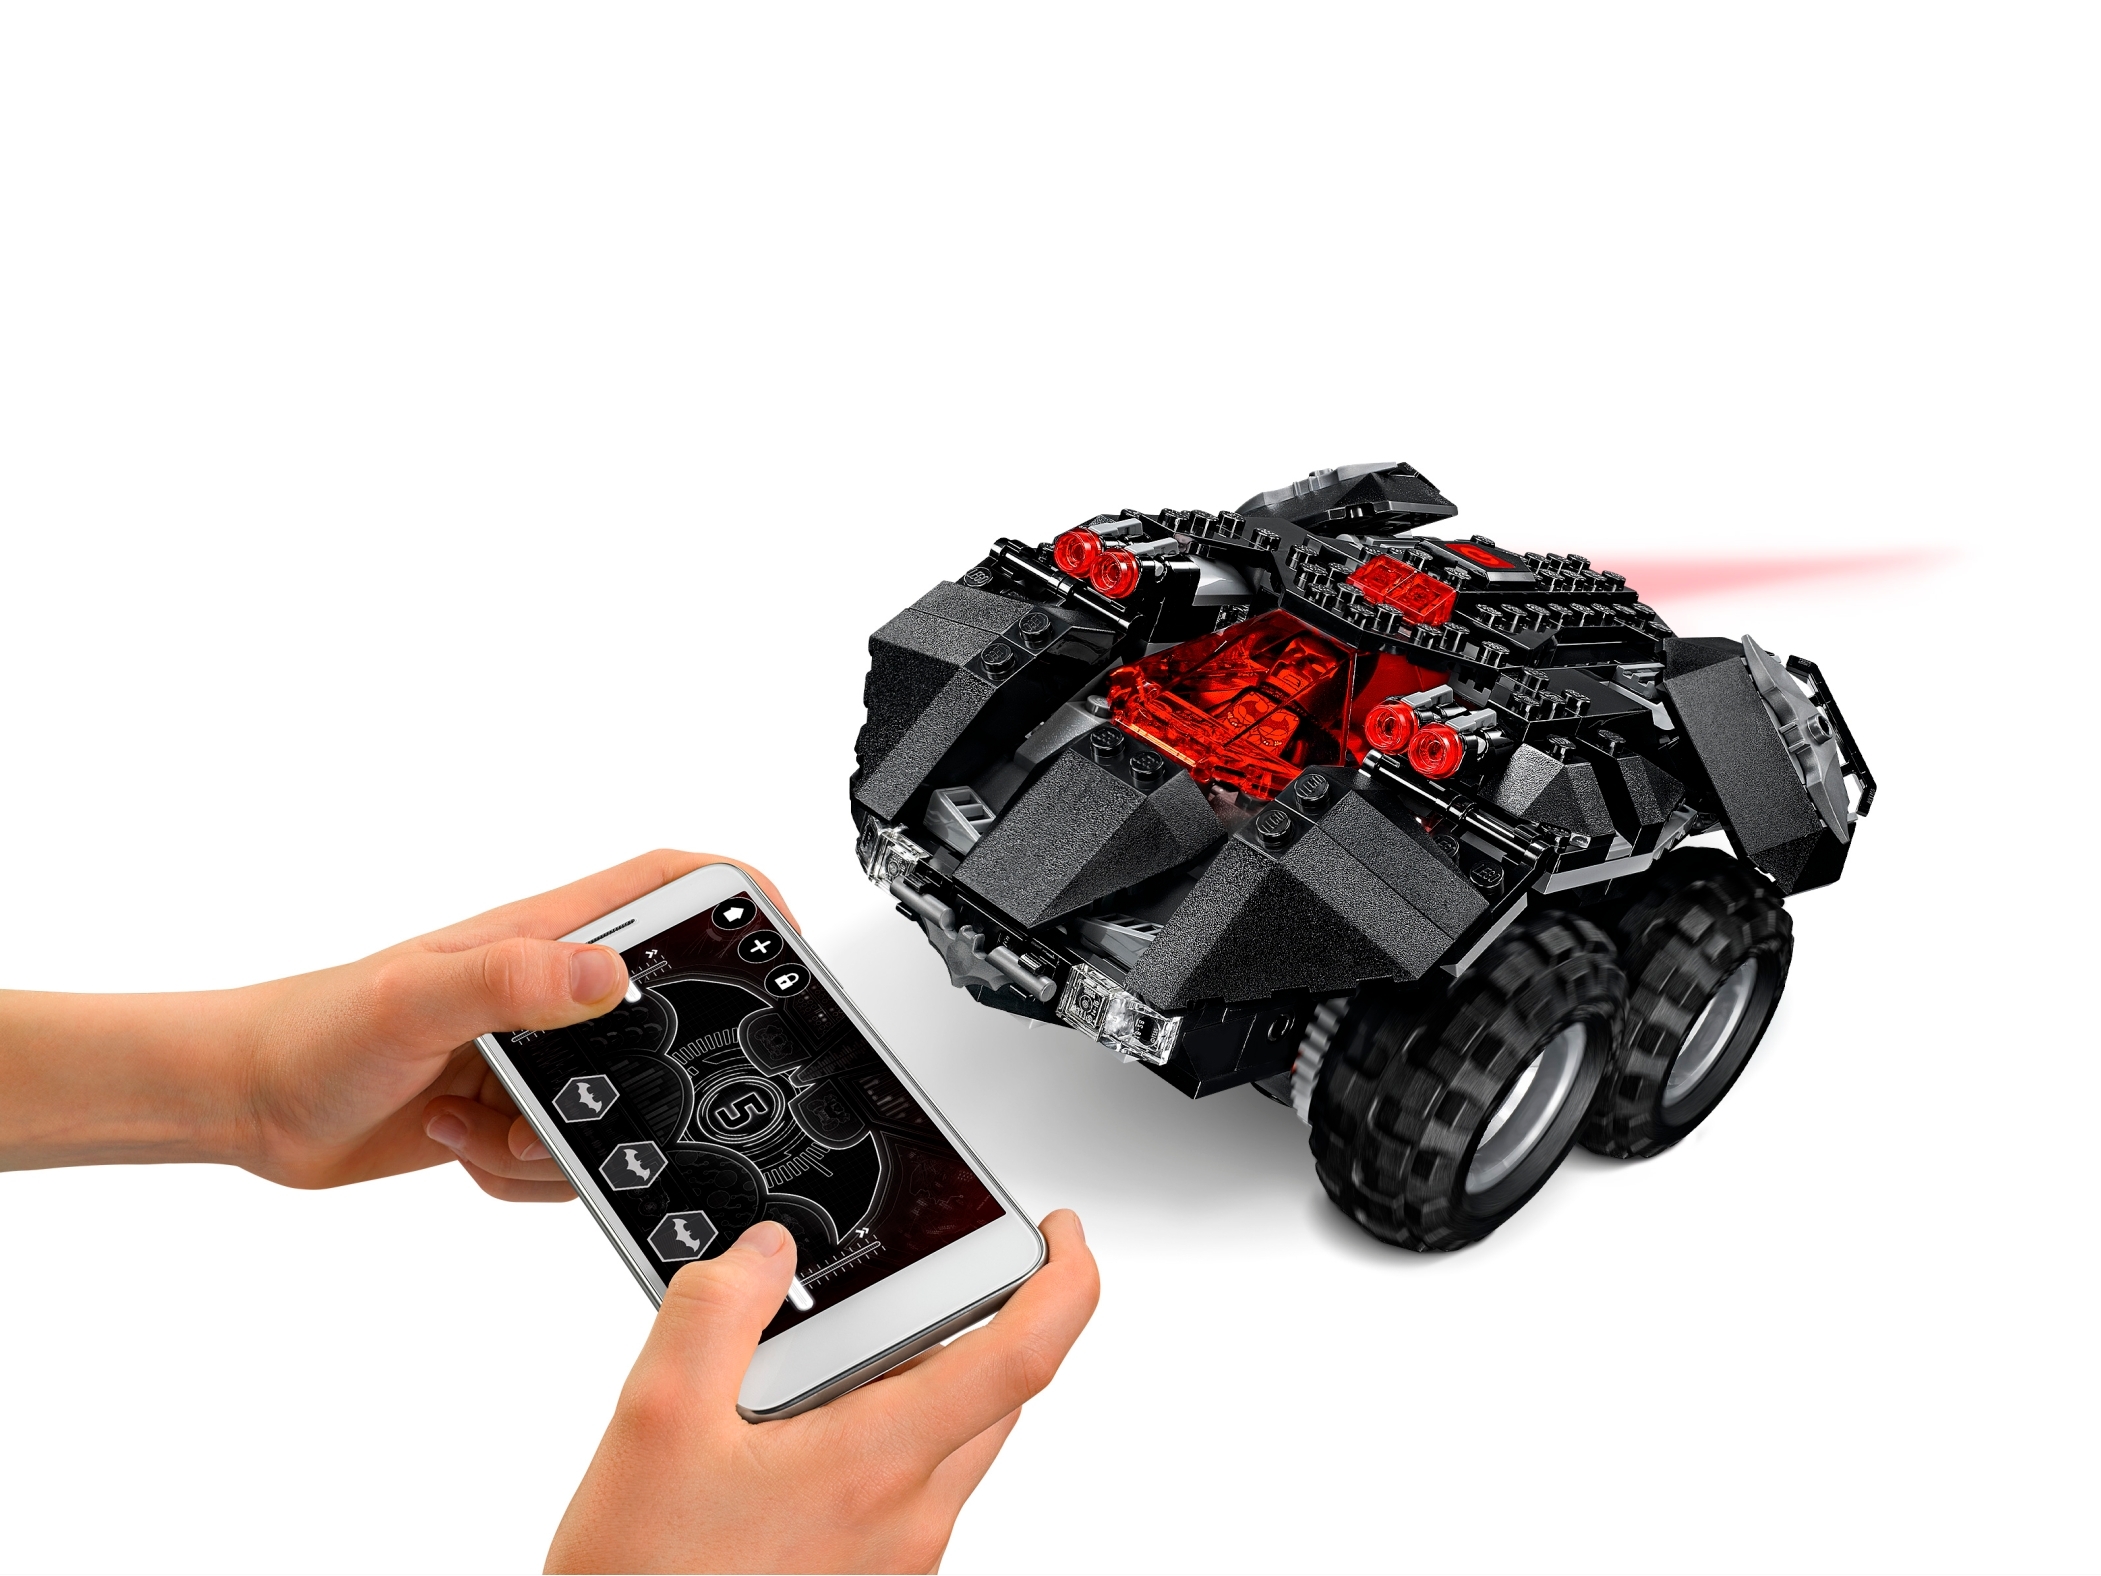 App-Controlled Batmobile 76112 | Powered UP | Buy at the Official US